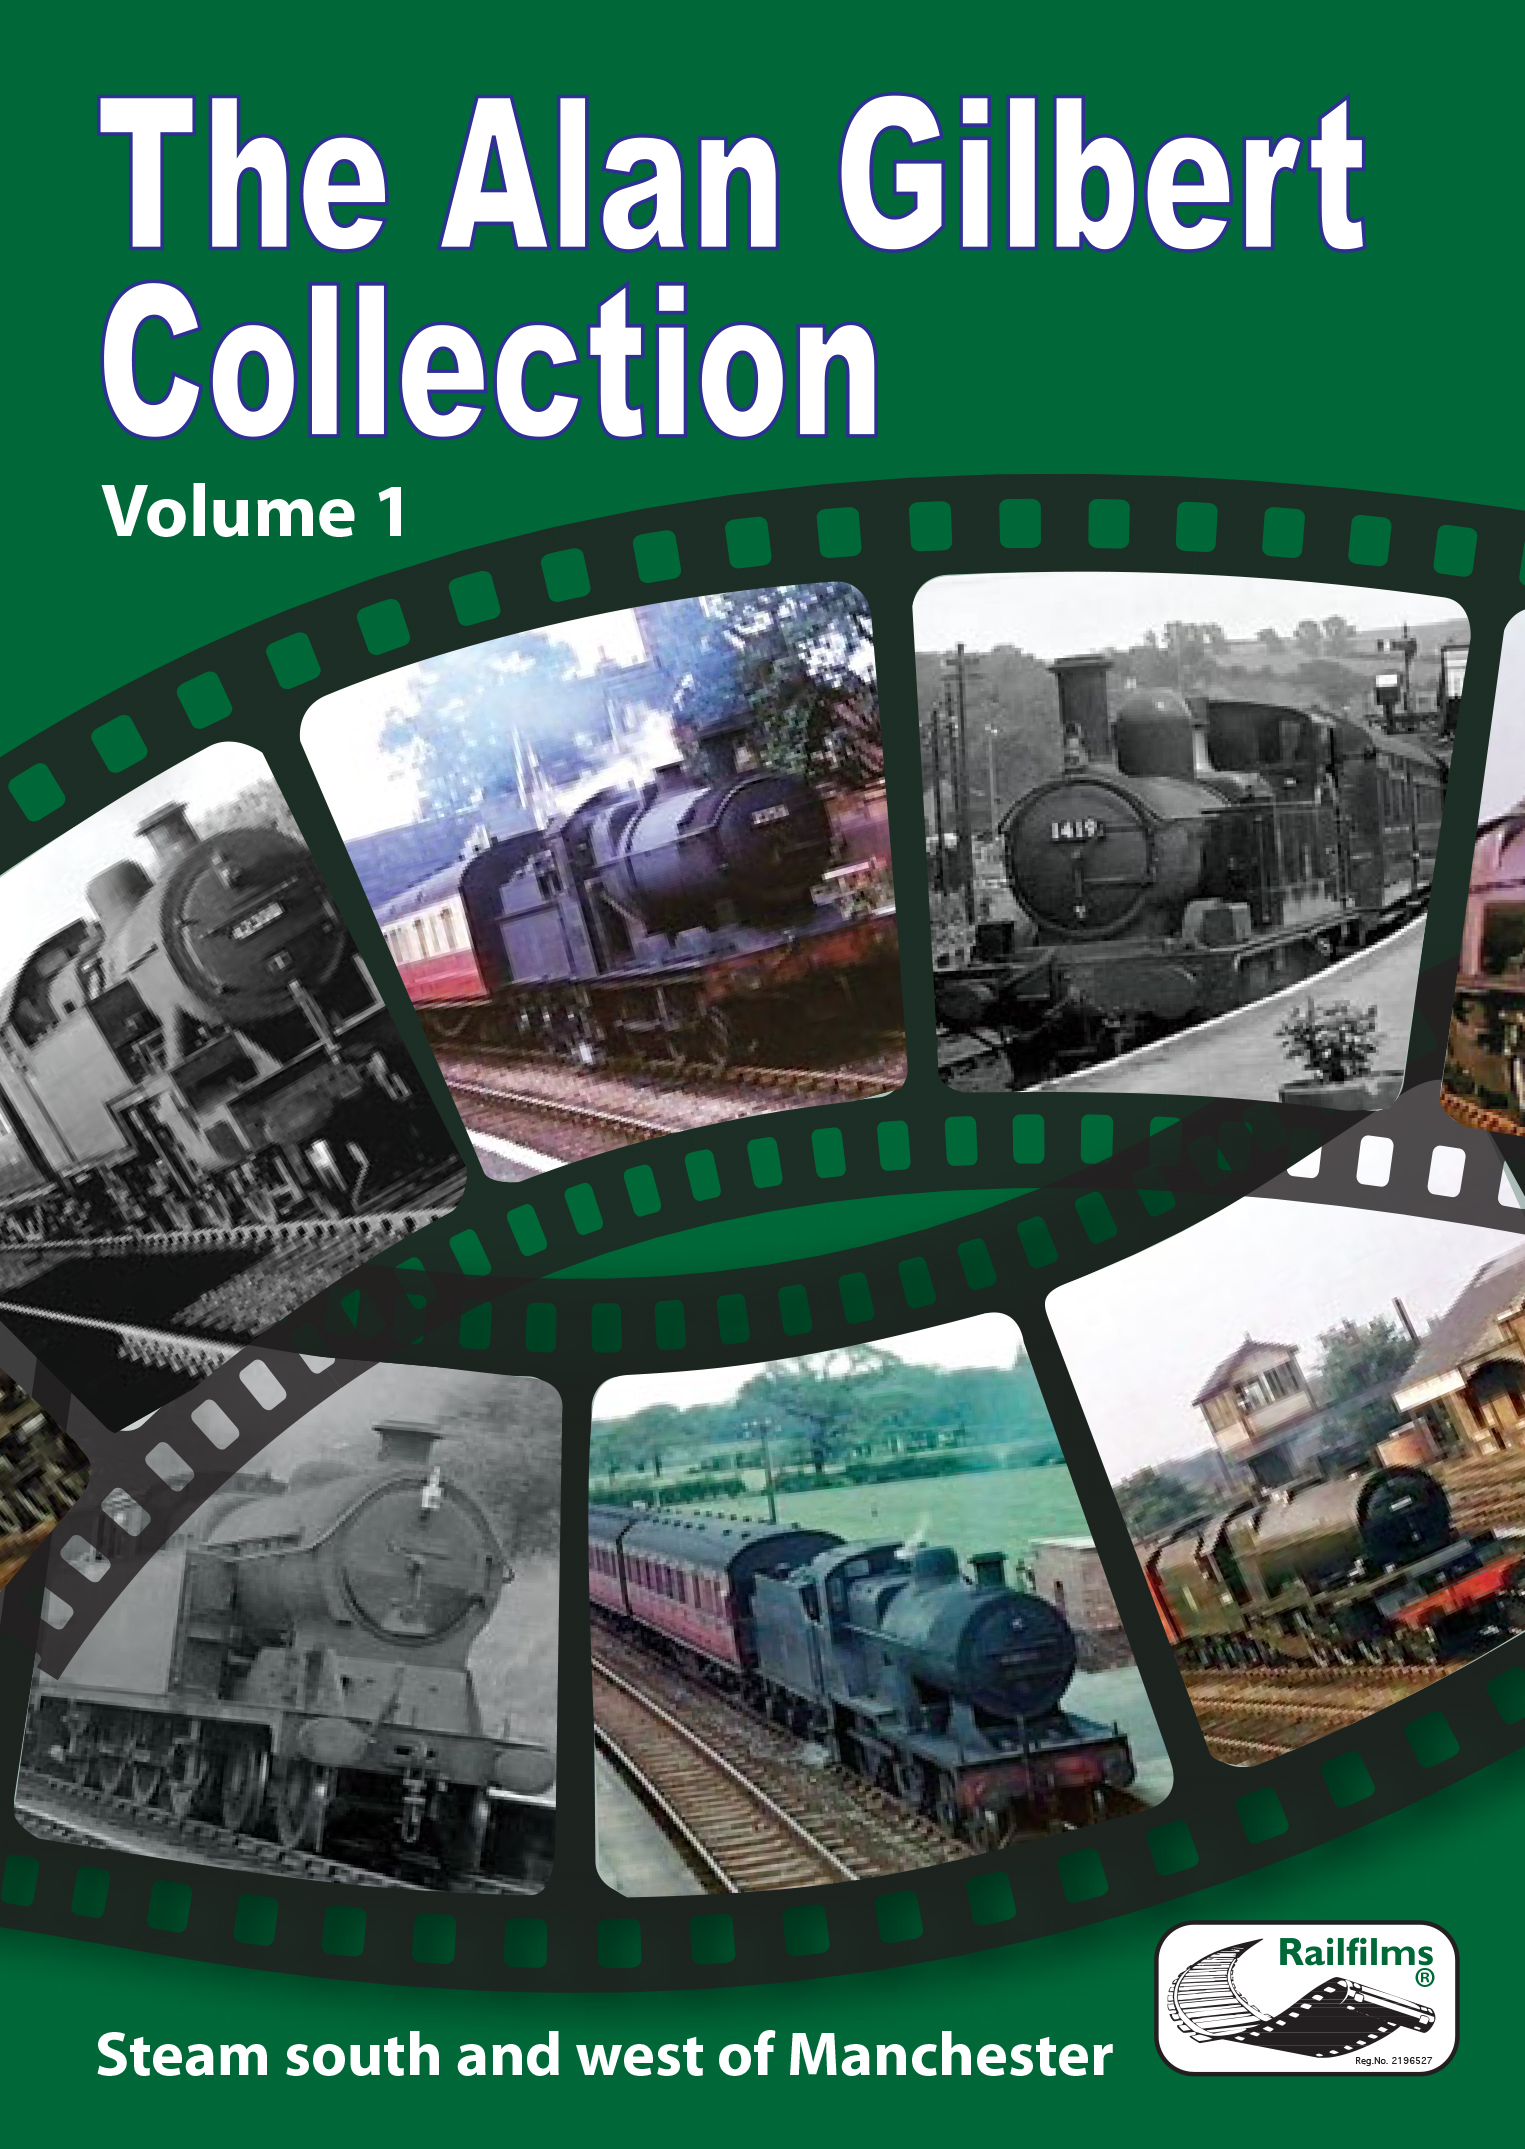 The Alan Gilbert Collection Vol, 1: Steam South and West of Manchester